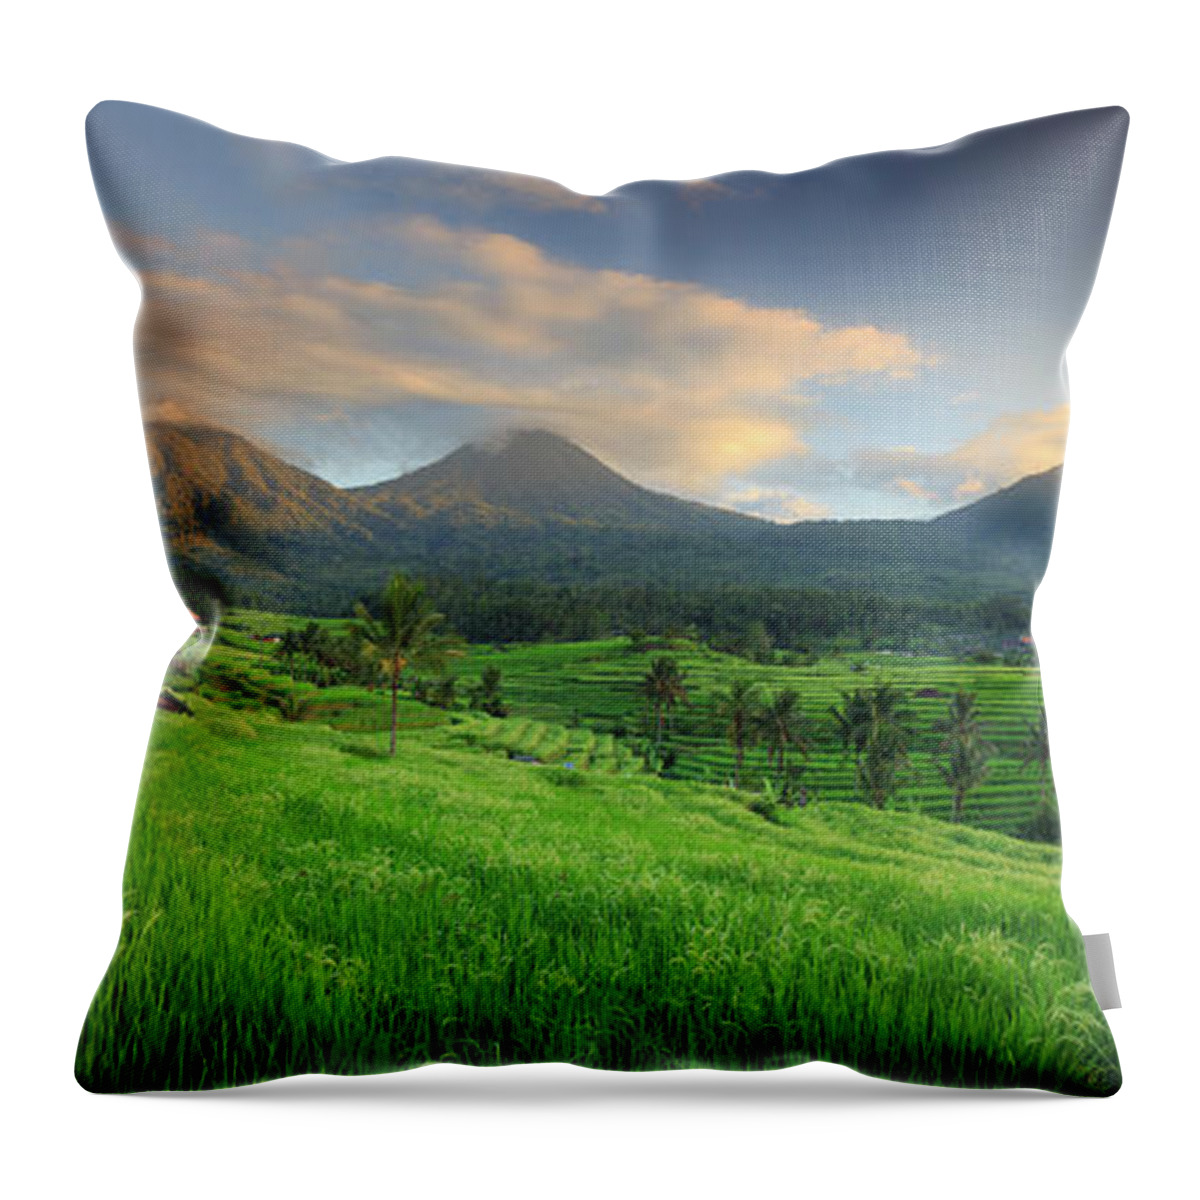 Scenics Throw Pillow featuring the photograph Indonesia, Bali, Rice Fields And #7 by Michele Falzone